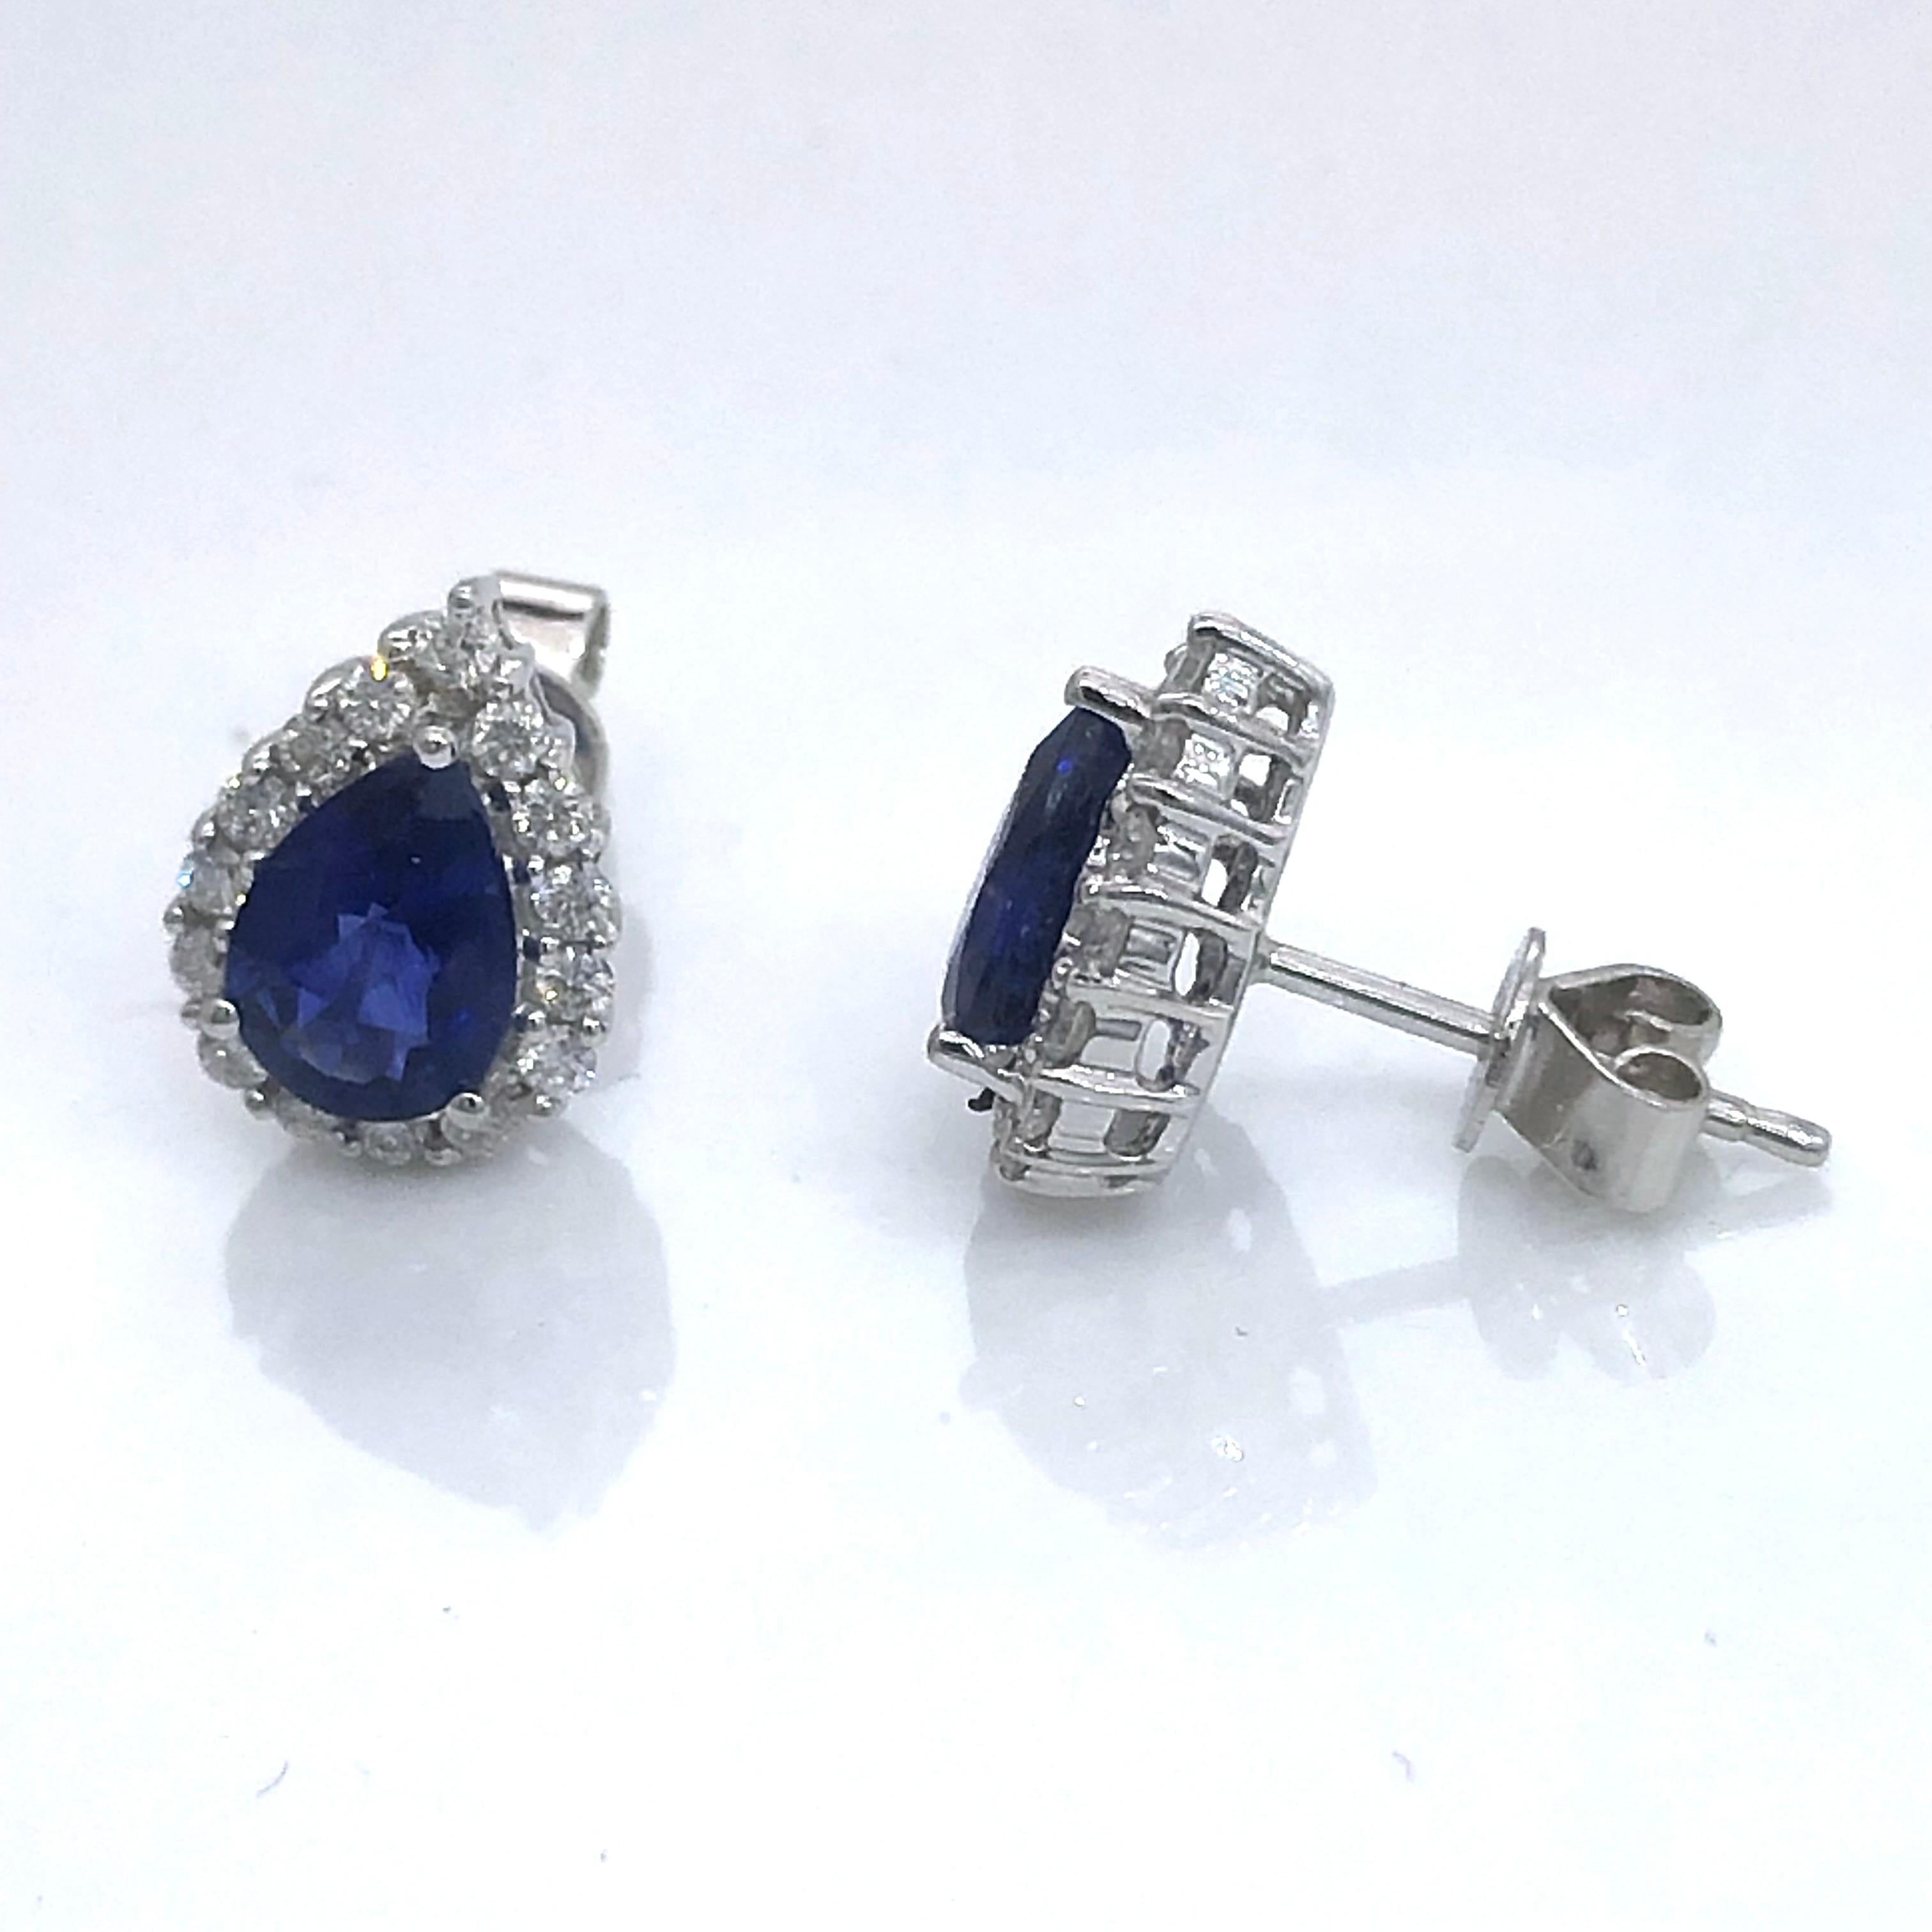 Women's White gold earrings with pear shape Ceylon sapphires surrounded by diamonds For Sale